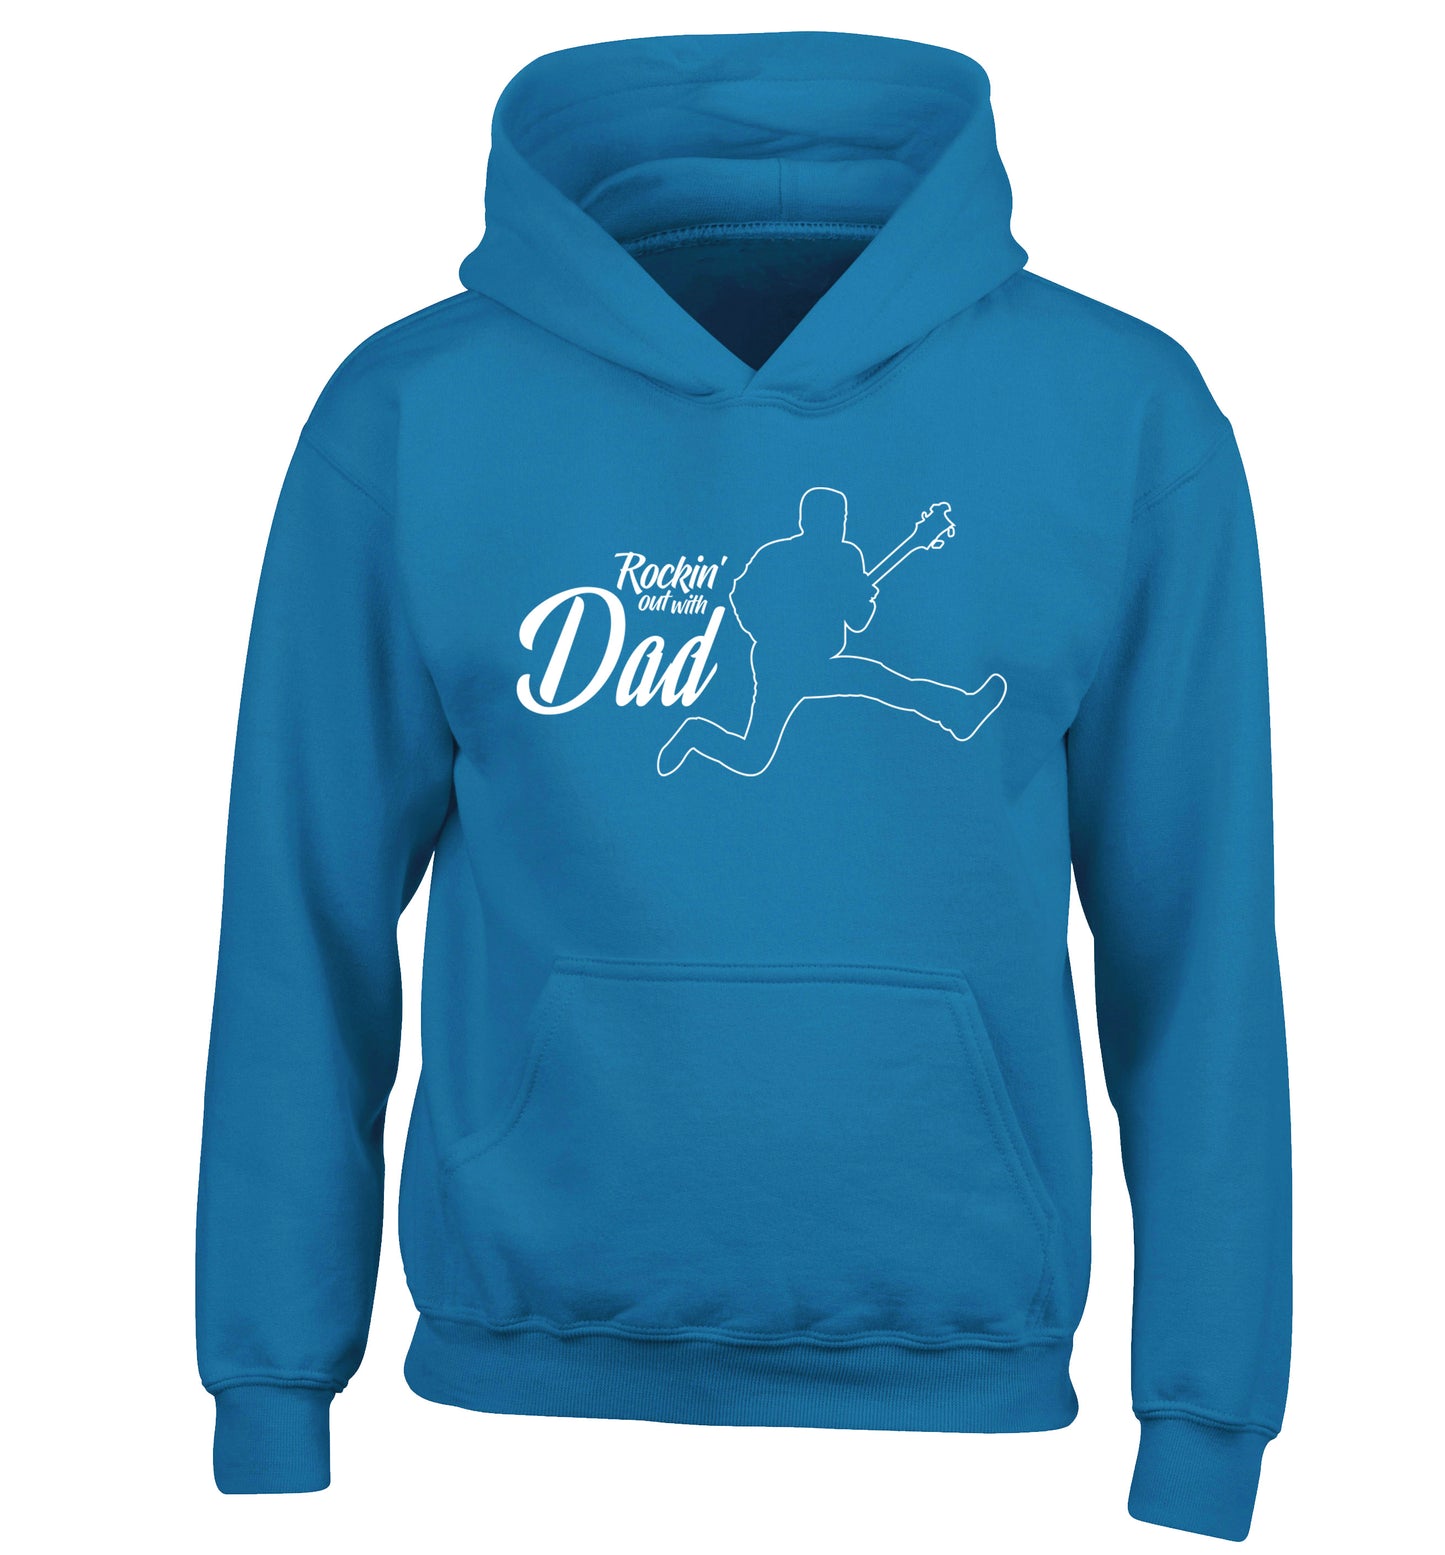 Rockin out with dad children's blue hoodie 12-13 Years